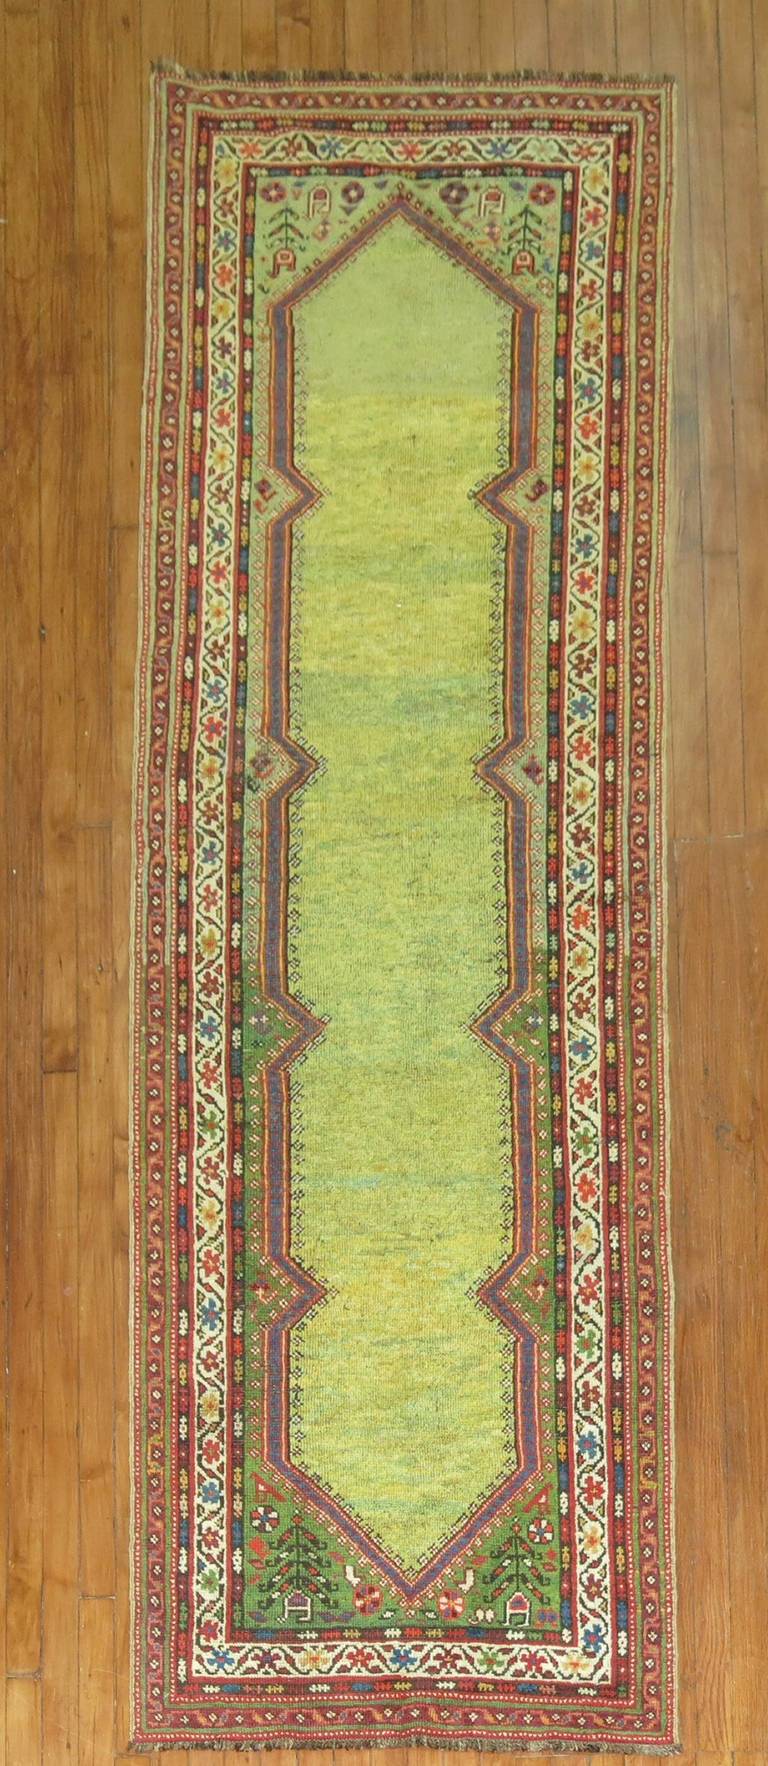 A fascinating early 20th century Persian runner with an open lime green field.